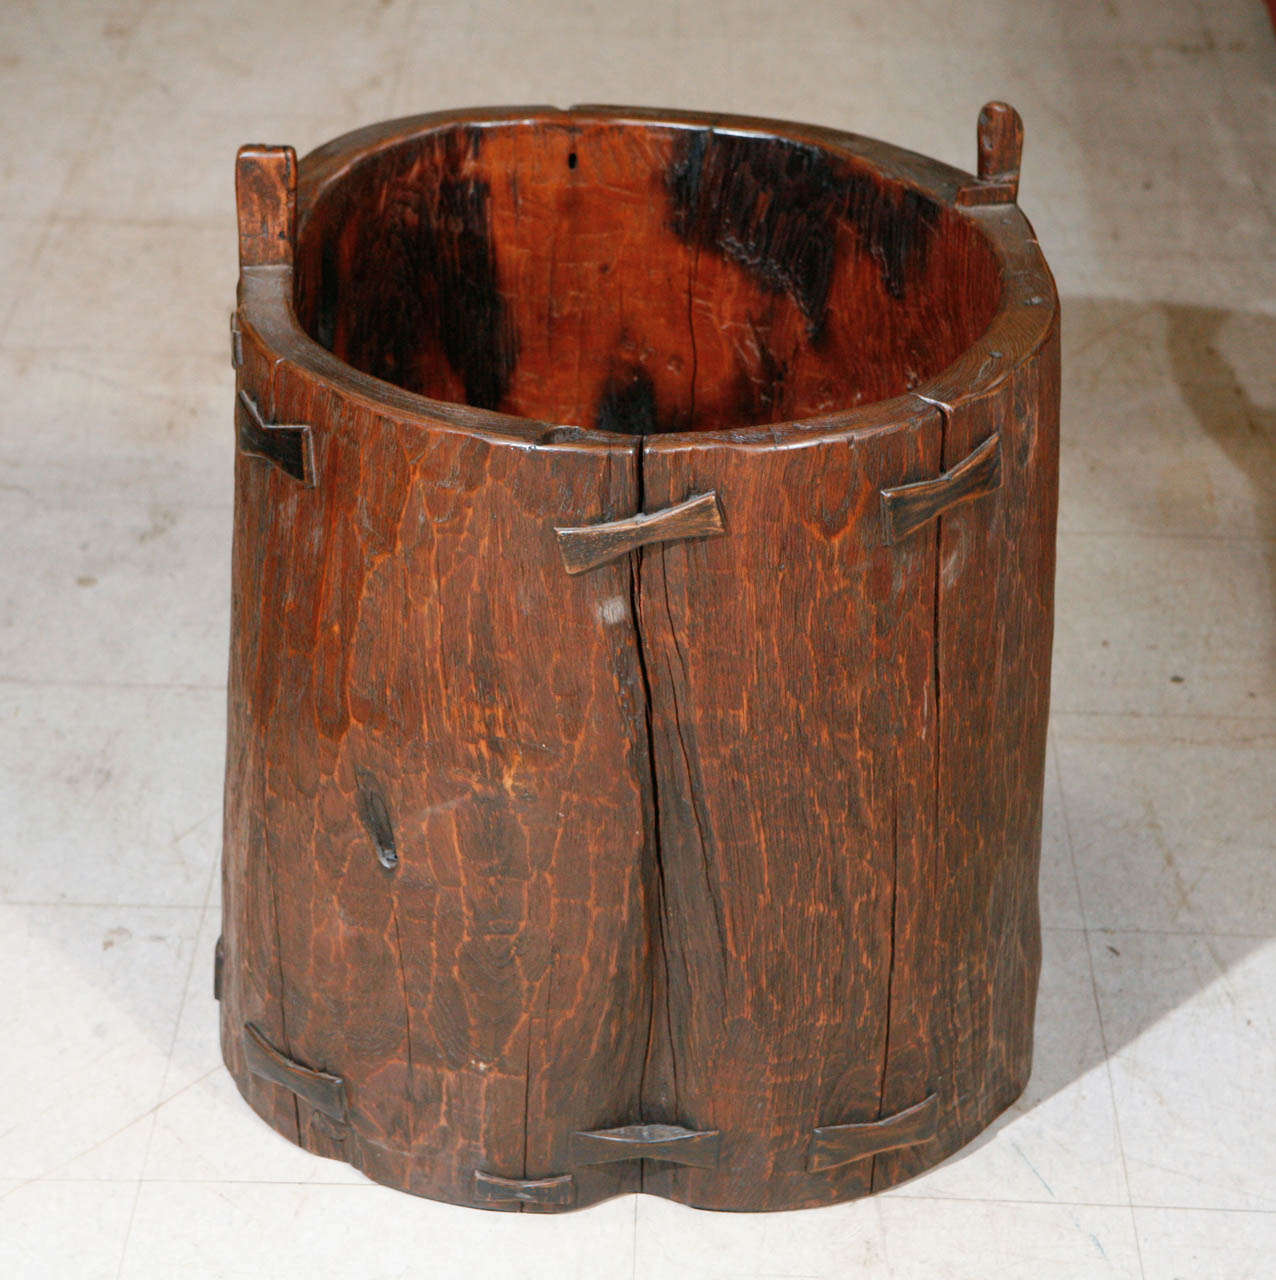 Rare and unusual antique granary vessel of thick teak hardwood with thirteen butterfly inserts, rural Java, circa 19th Century.